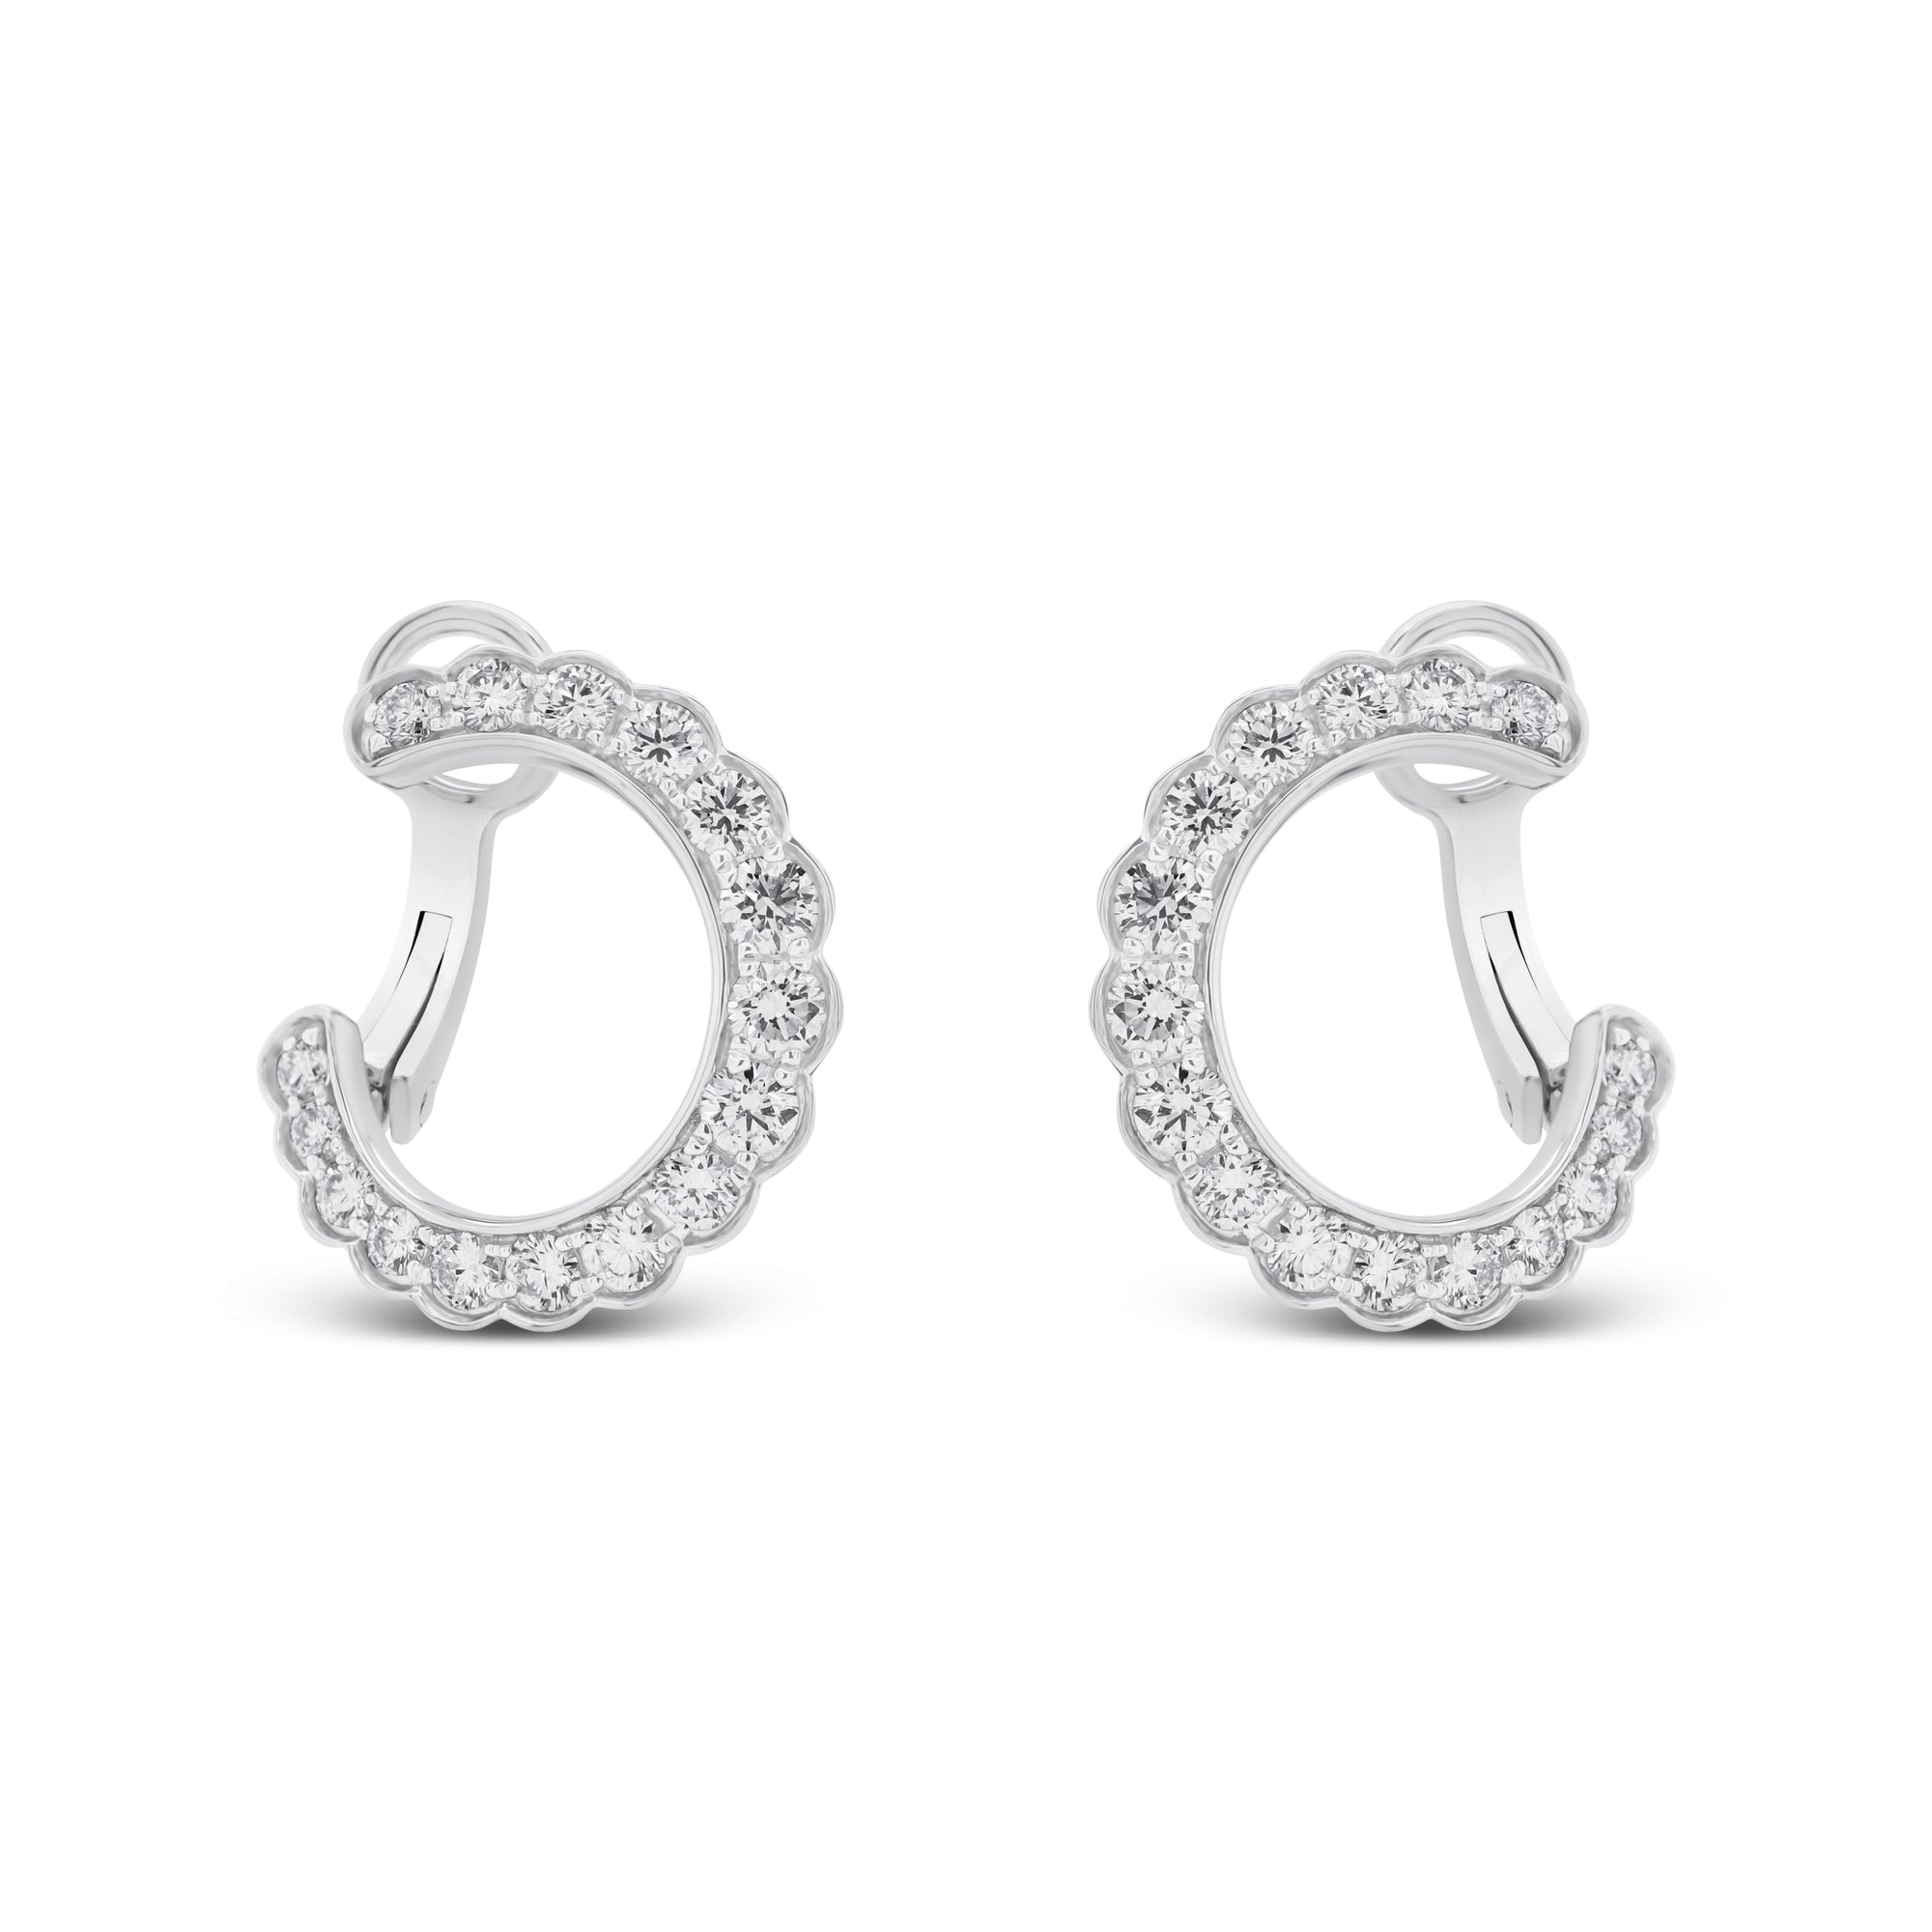 Diamond scalloped front-facing hoop earrings - 18K gold weighing 4.23 grams  - 32 round diamonds totaling 1.02 carats